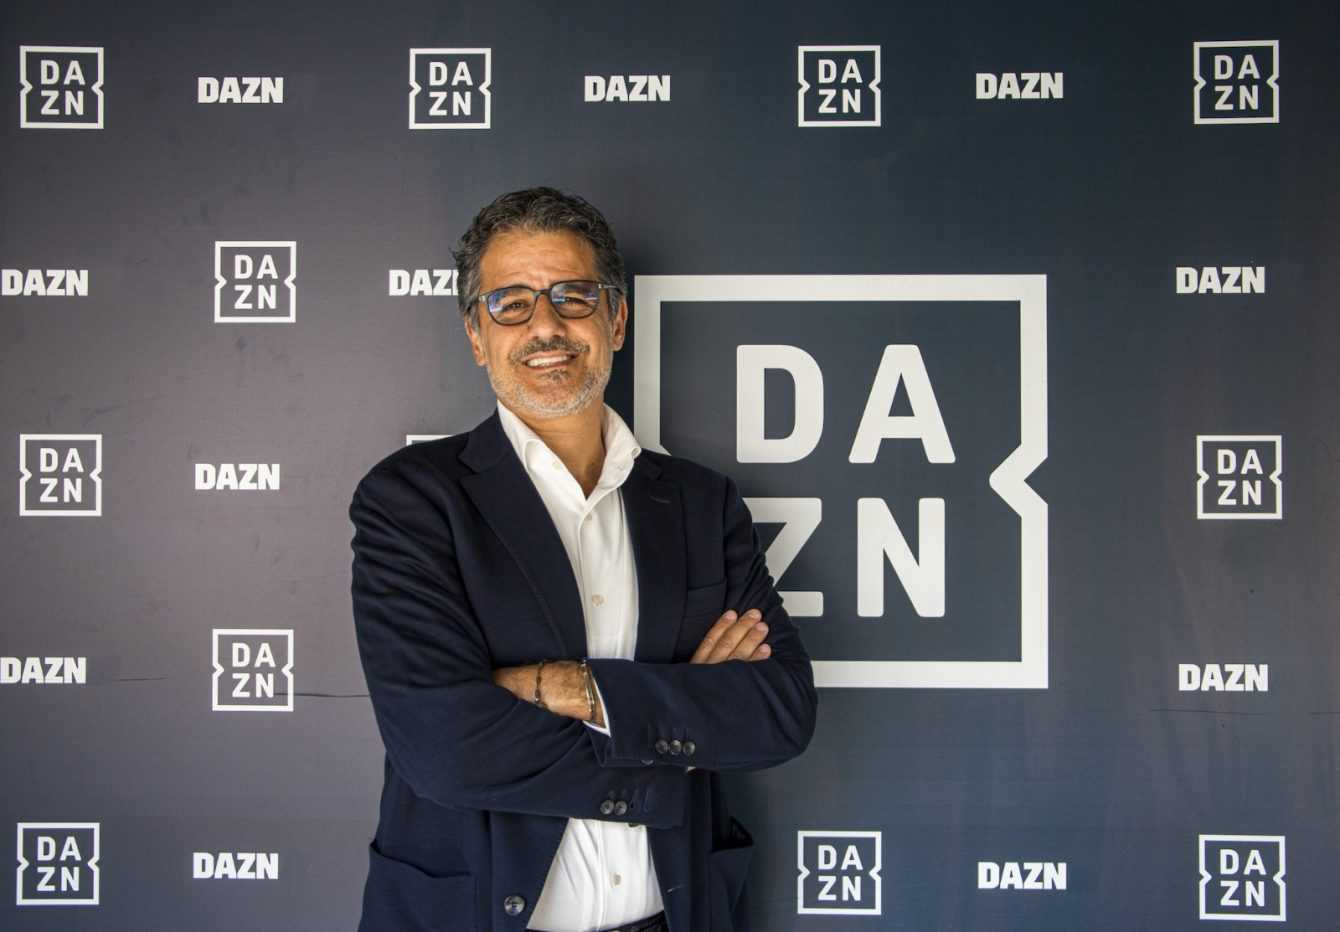 DAZN wins the rights to Serie A TIM until 2029